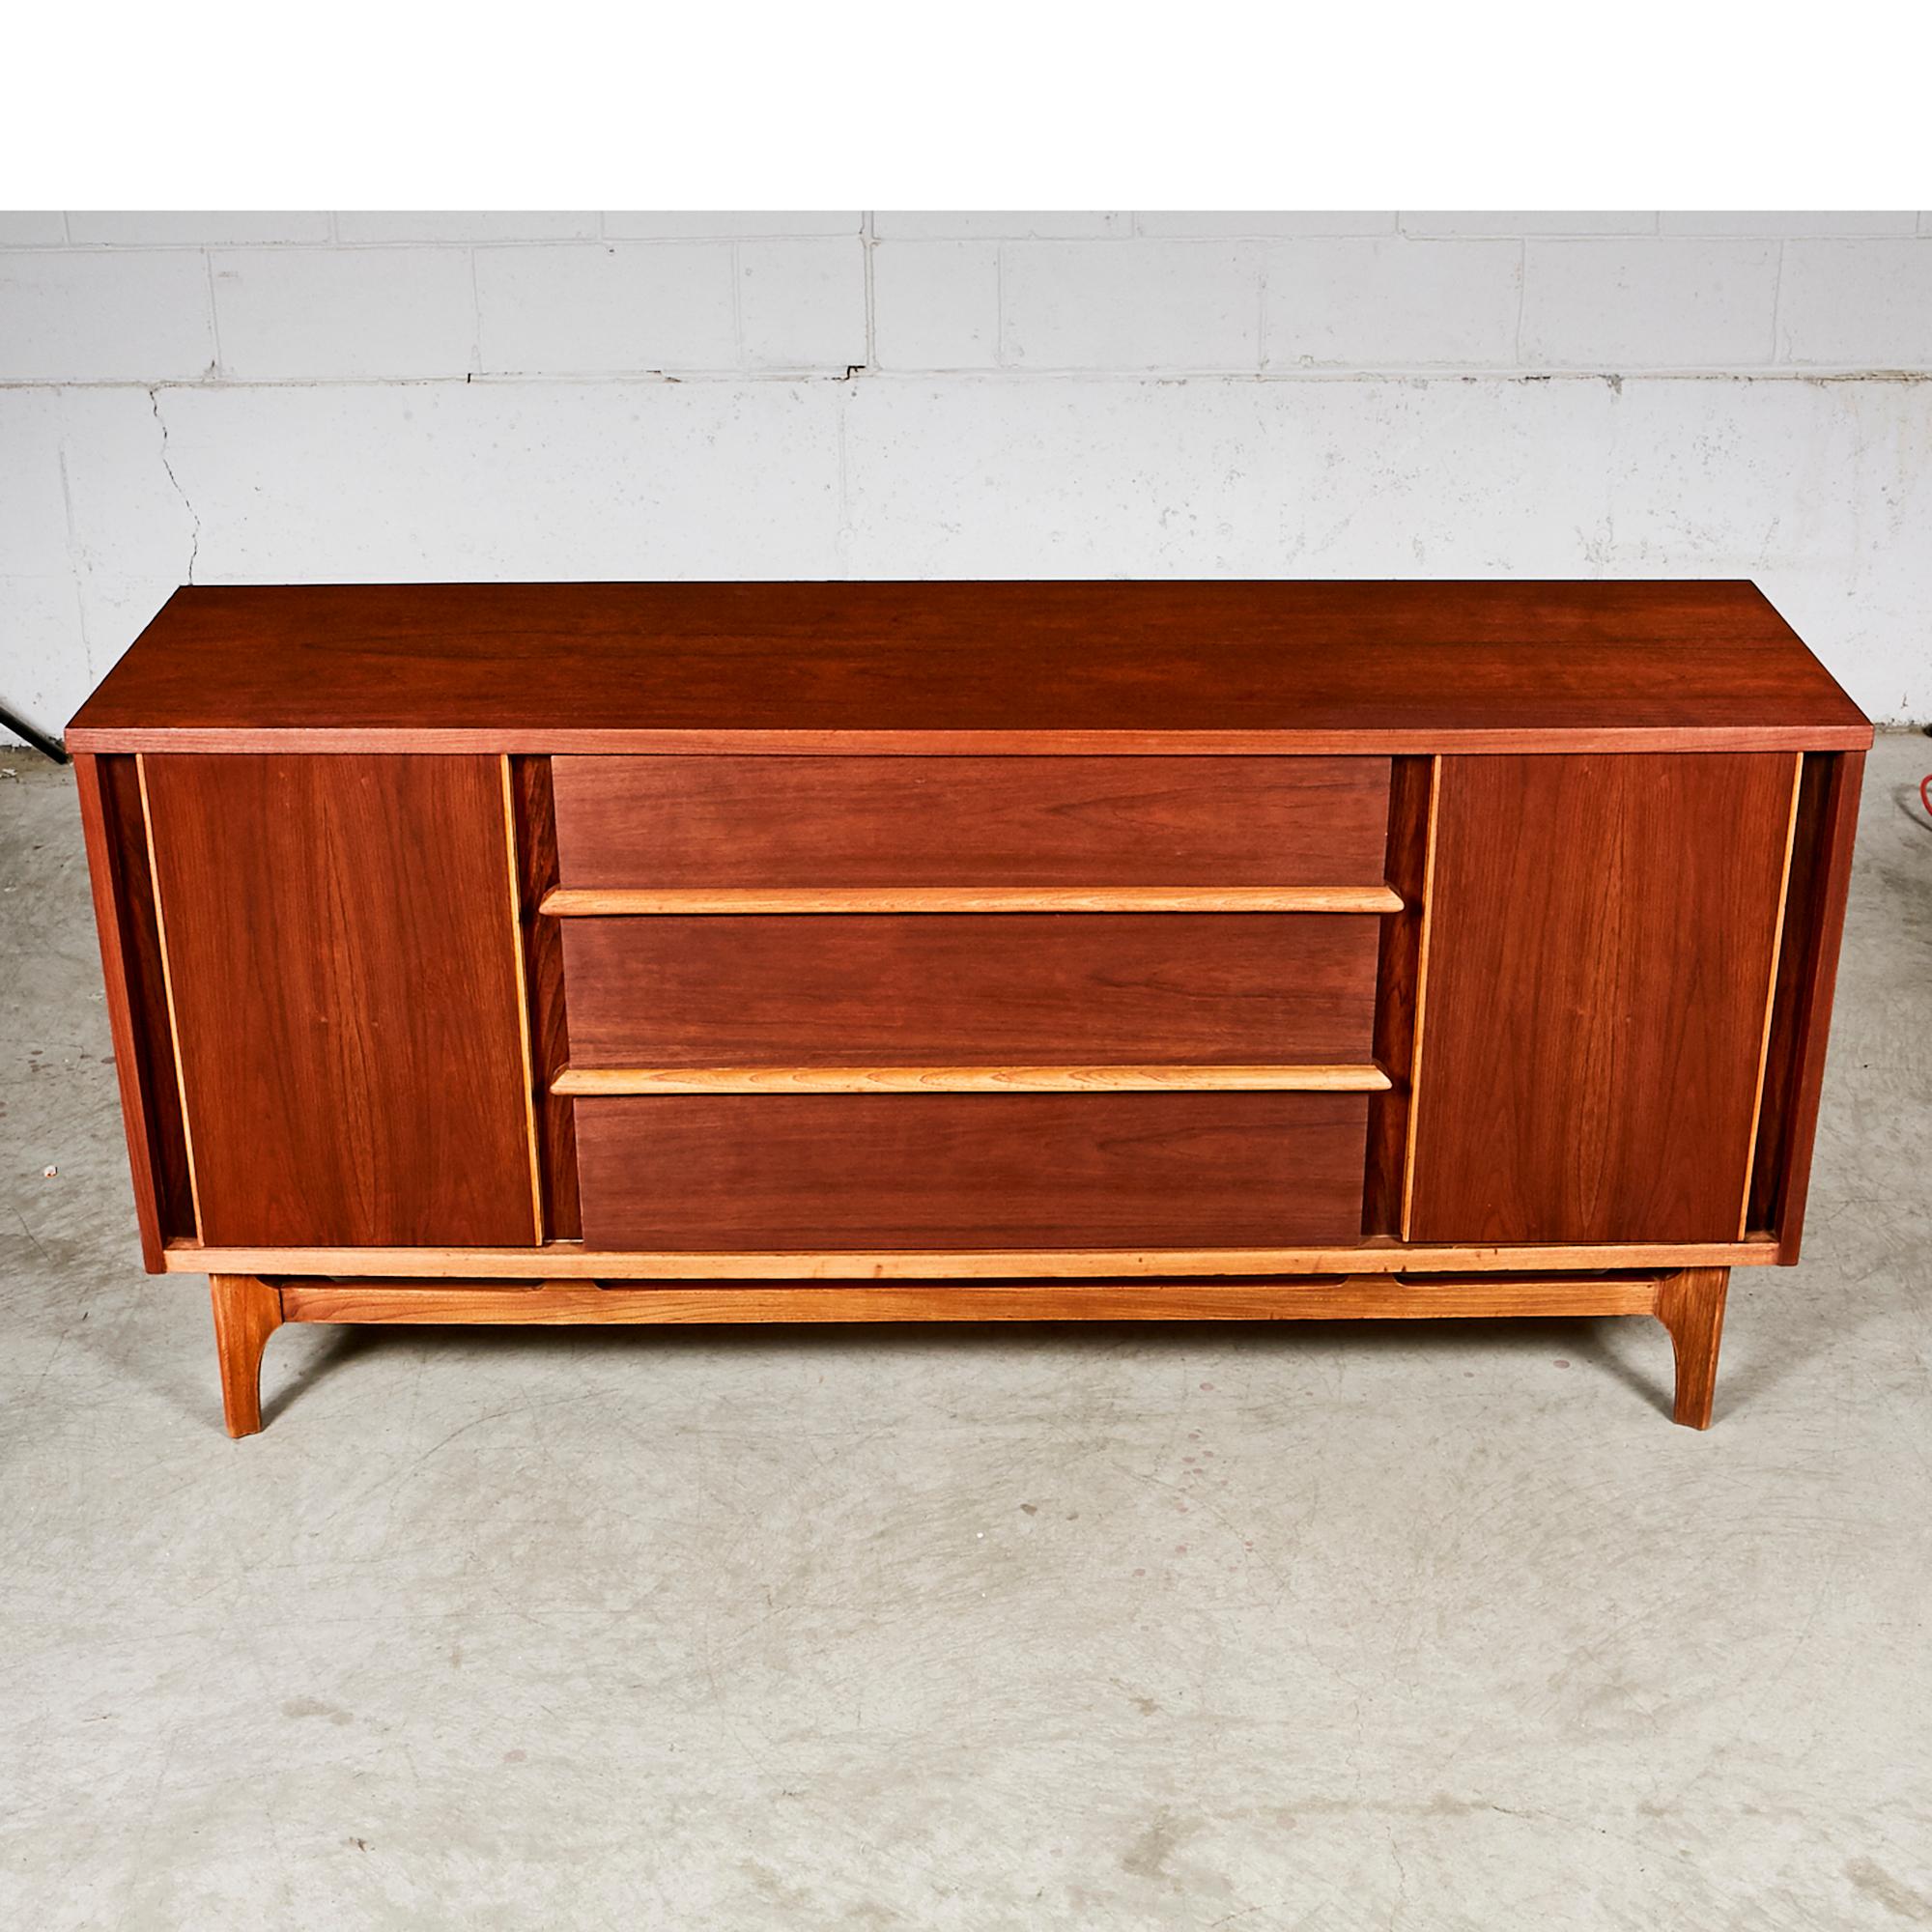 Mid-Century Modern 1960s walnut wood sideboard with contrasting ash wood accents. The sideboard has three drawers and shelving for storage. In newly refinished condition. No maker's mark.